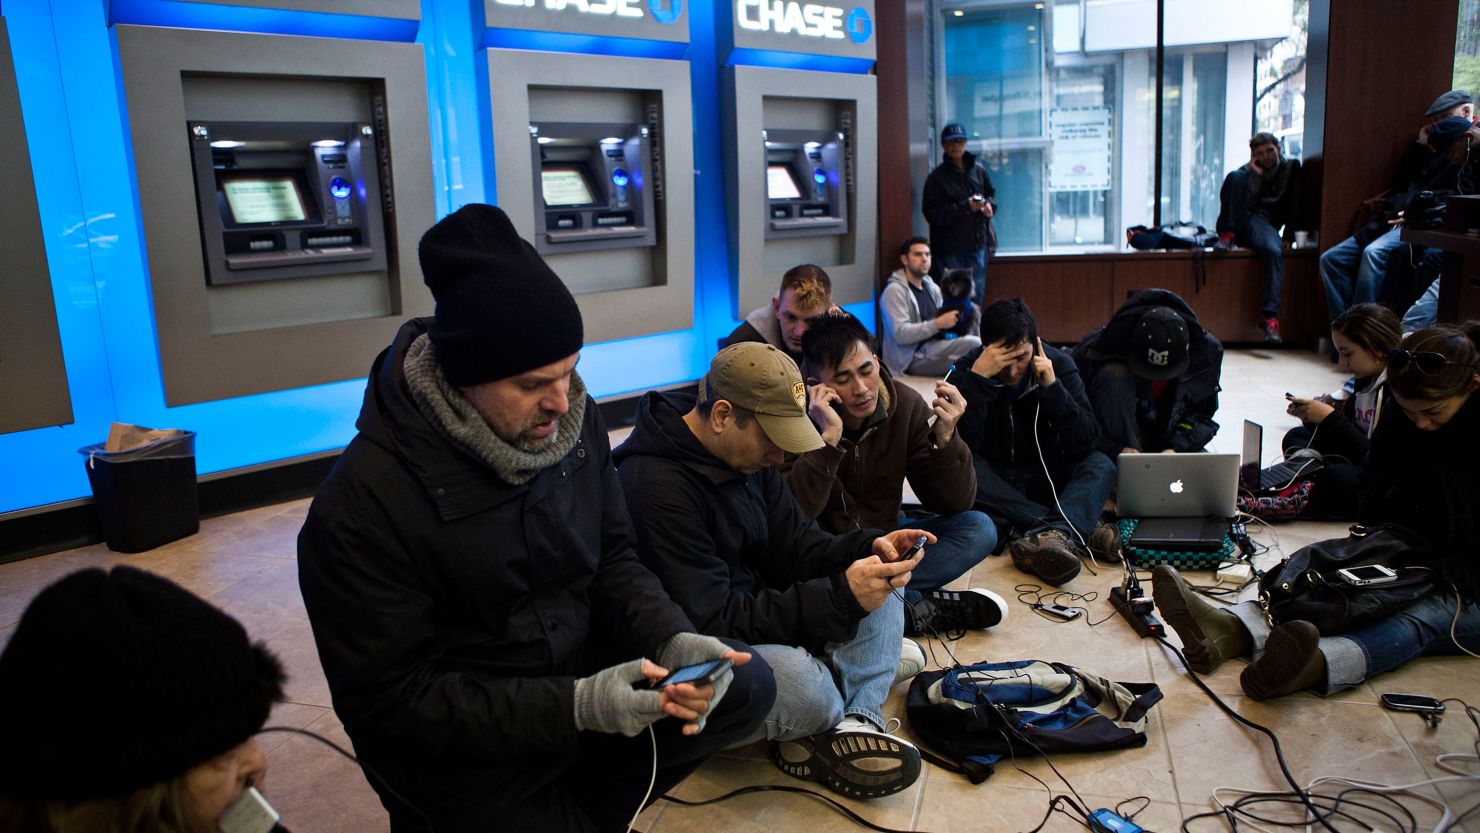 New Yorkers crowd into a Chase Bank ATM kiosk to charge phones and laptops at 40th Street and Third Avenue. 'This is the modern campfire,' one man said.